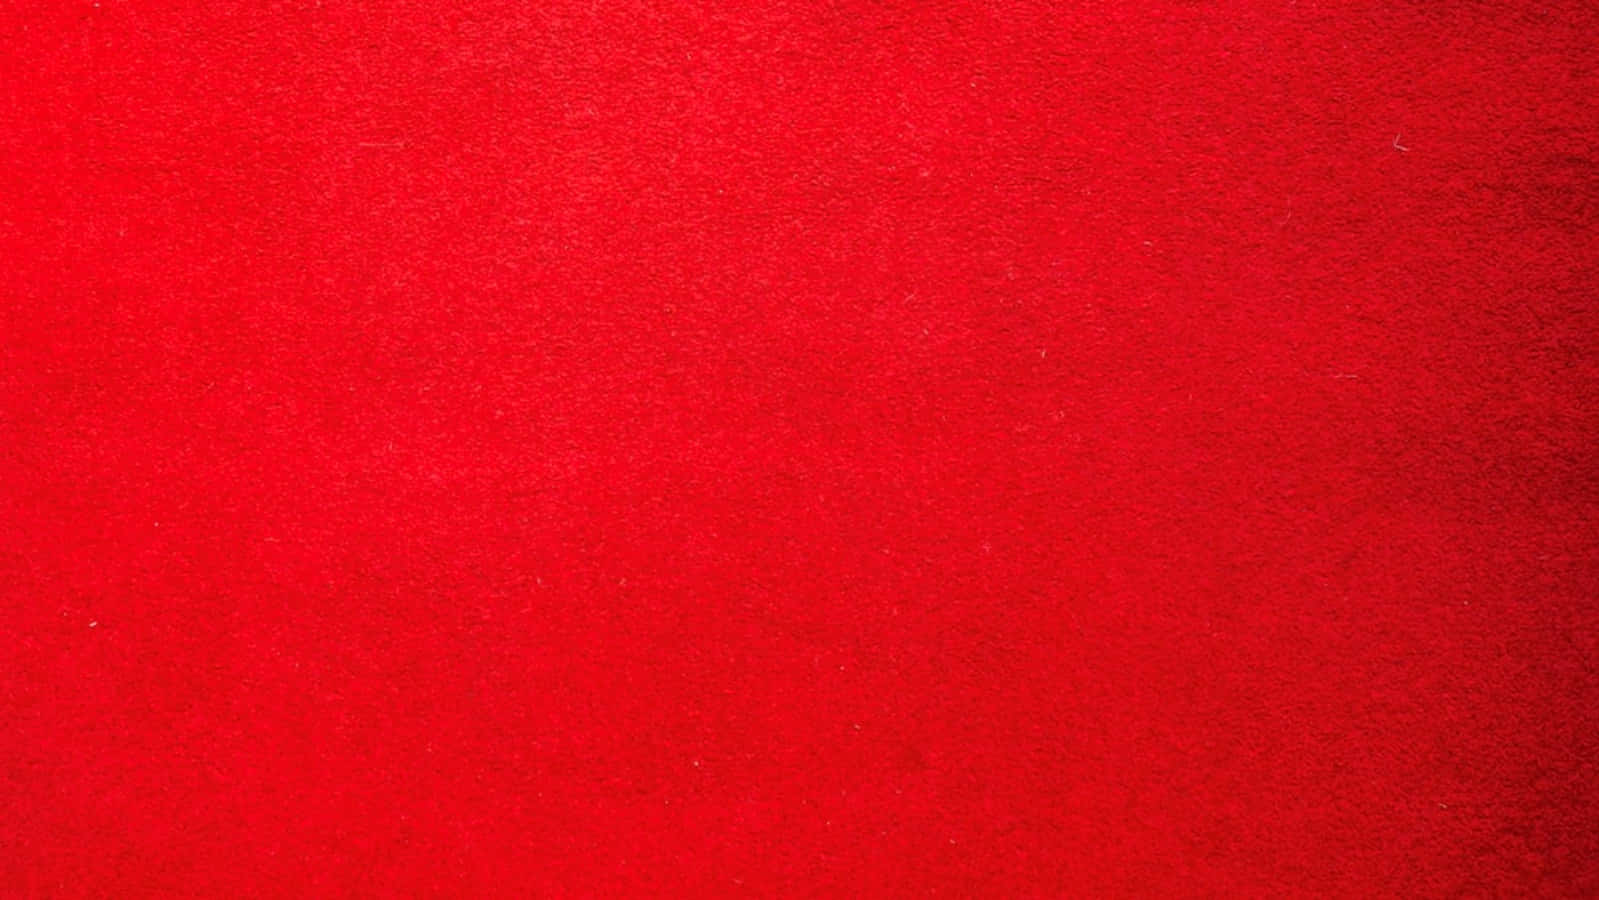 Red texture background Stock Photos, Royalty Free Red texture